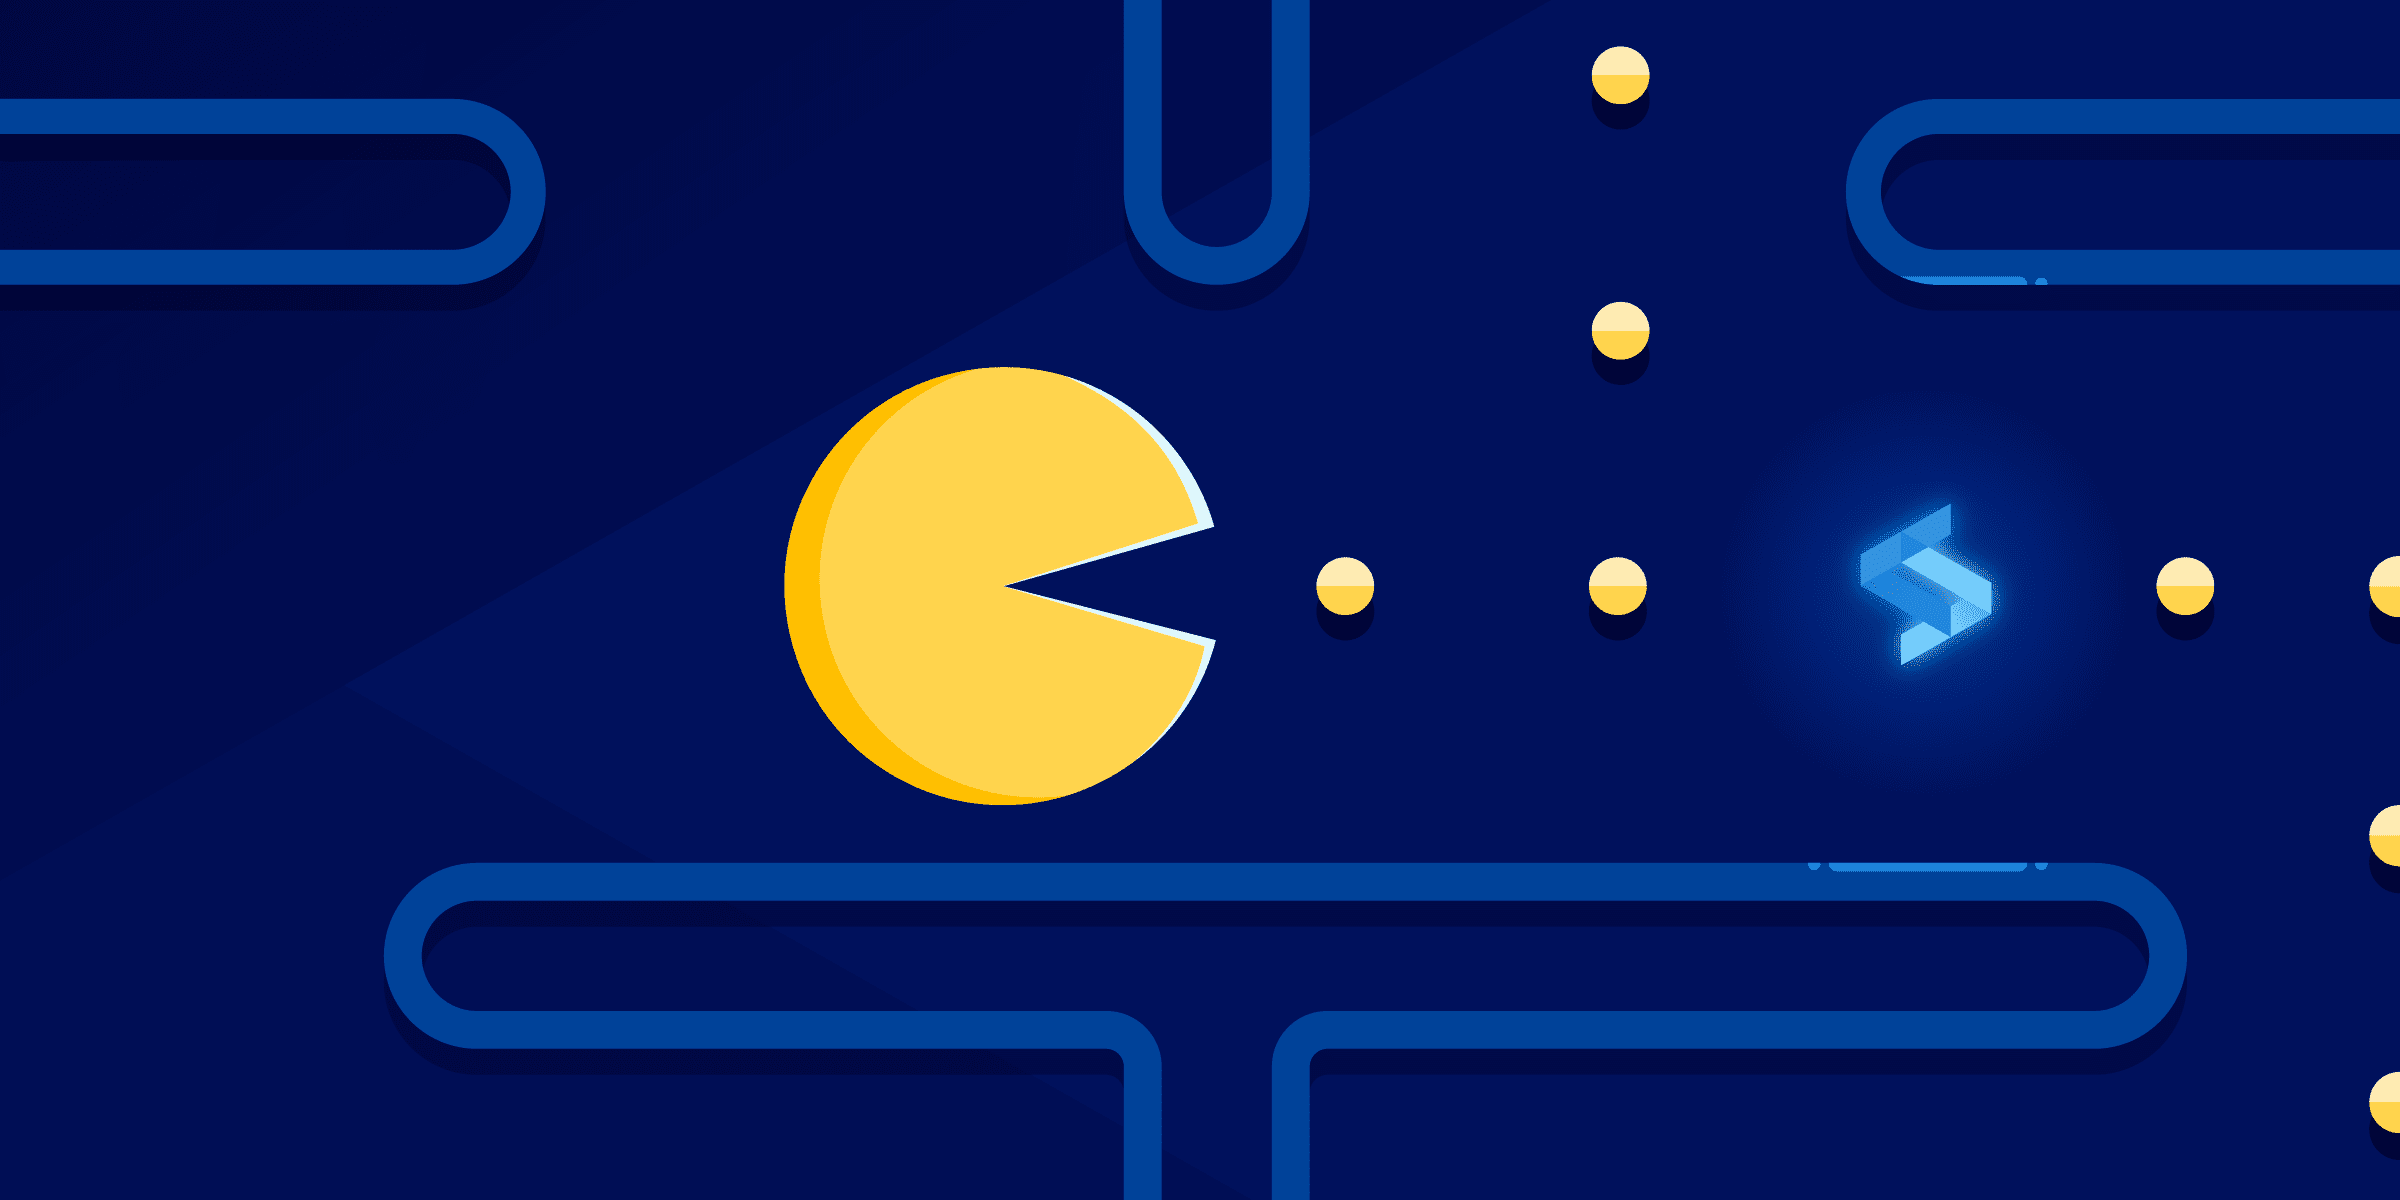 How Do the Ghosts in PAC-MAN Decide Where to Go?